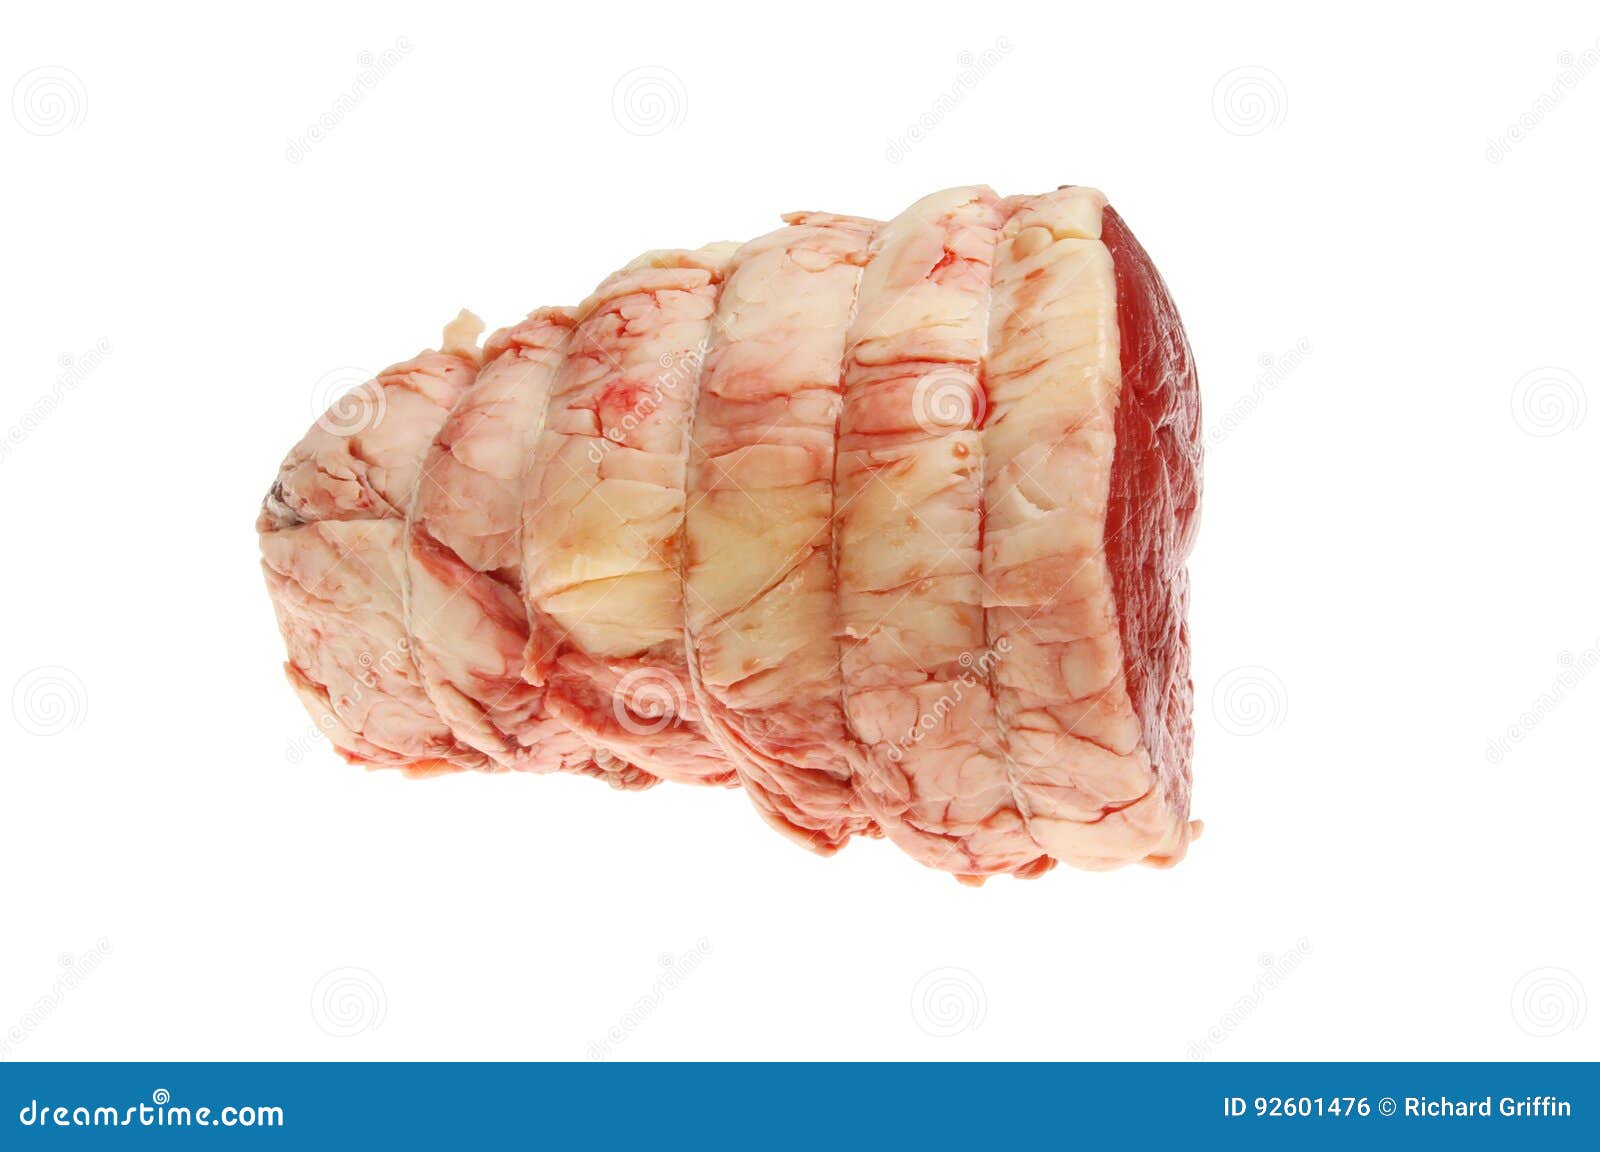 raw topside of beef joint